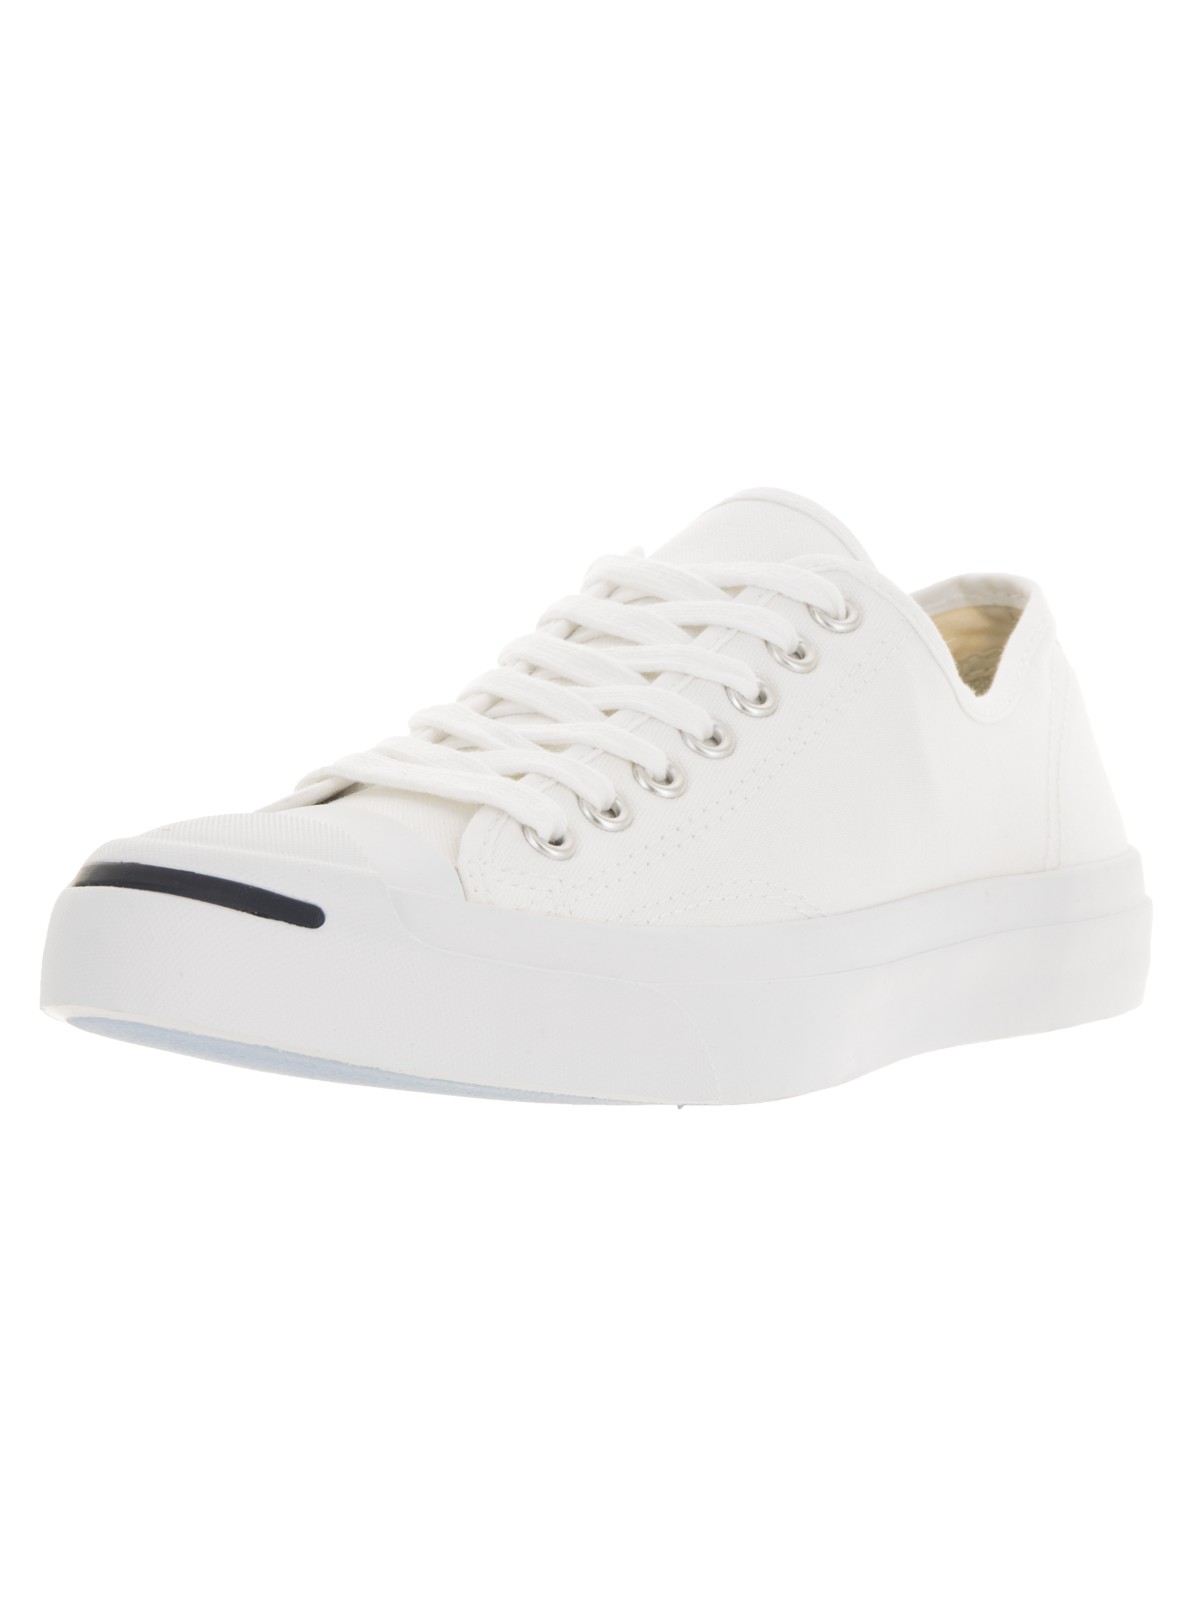 Converse Unisex Jack Purcell Cp Ox Casual Shoe - image 1 of 5